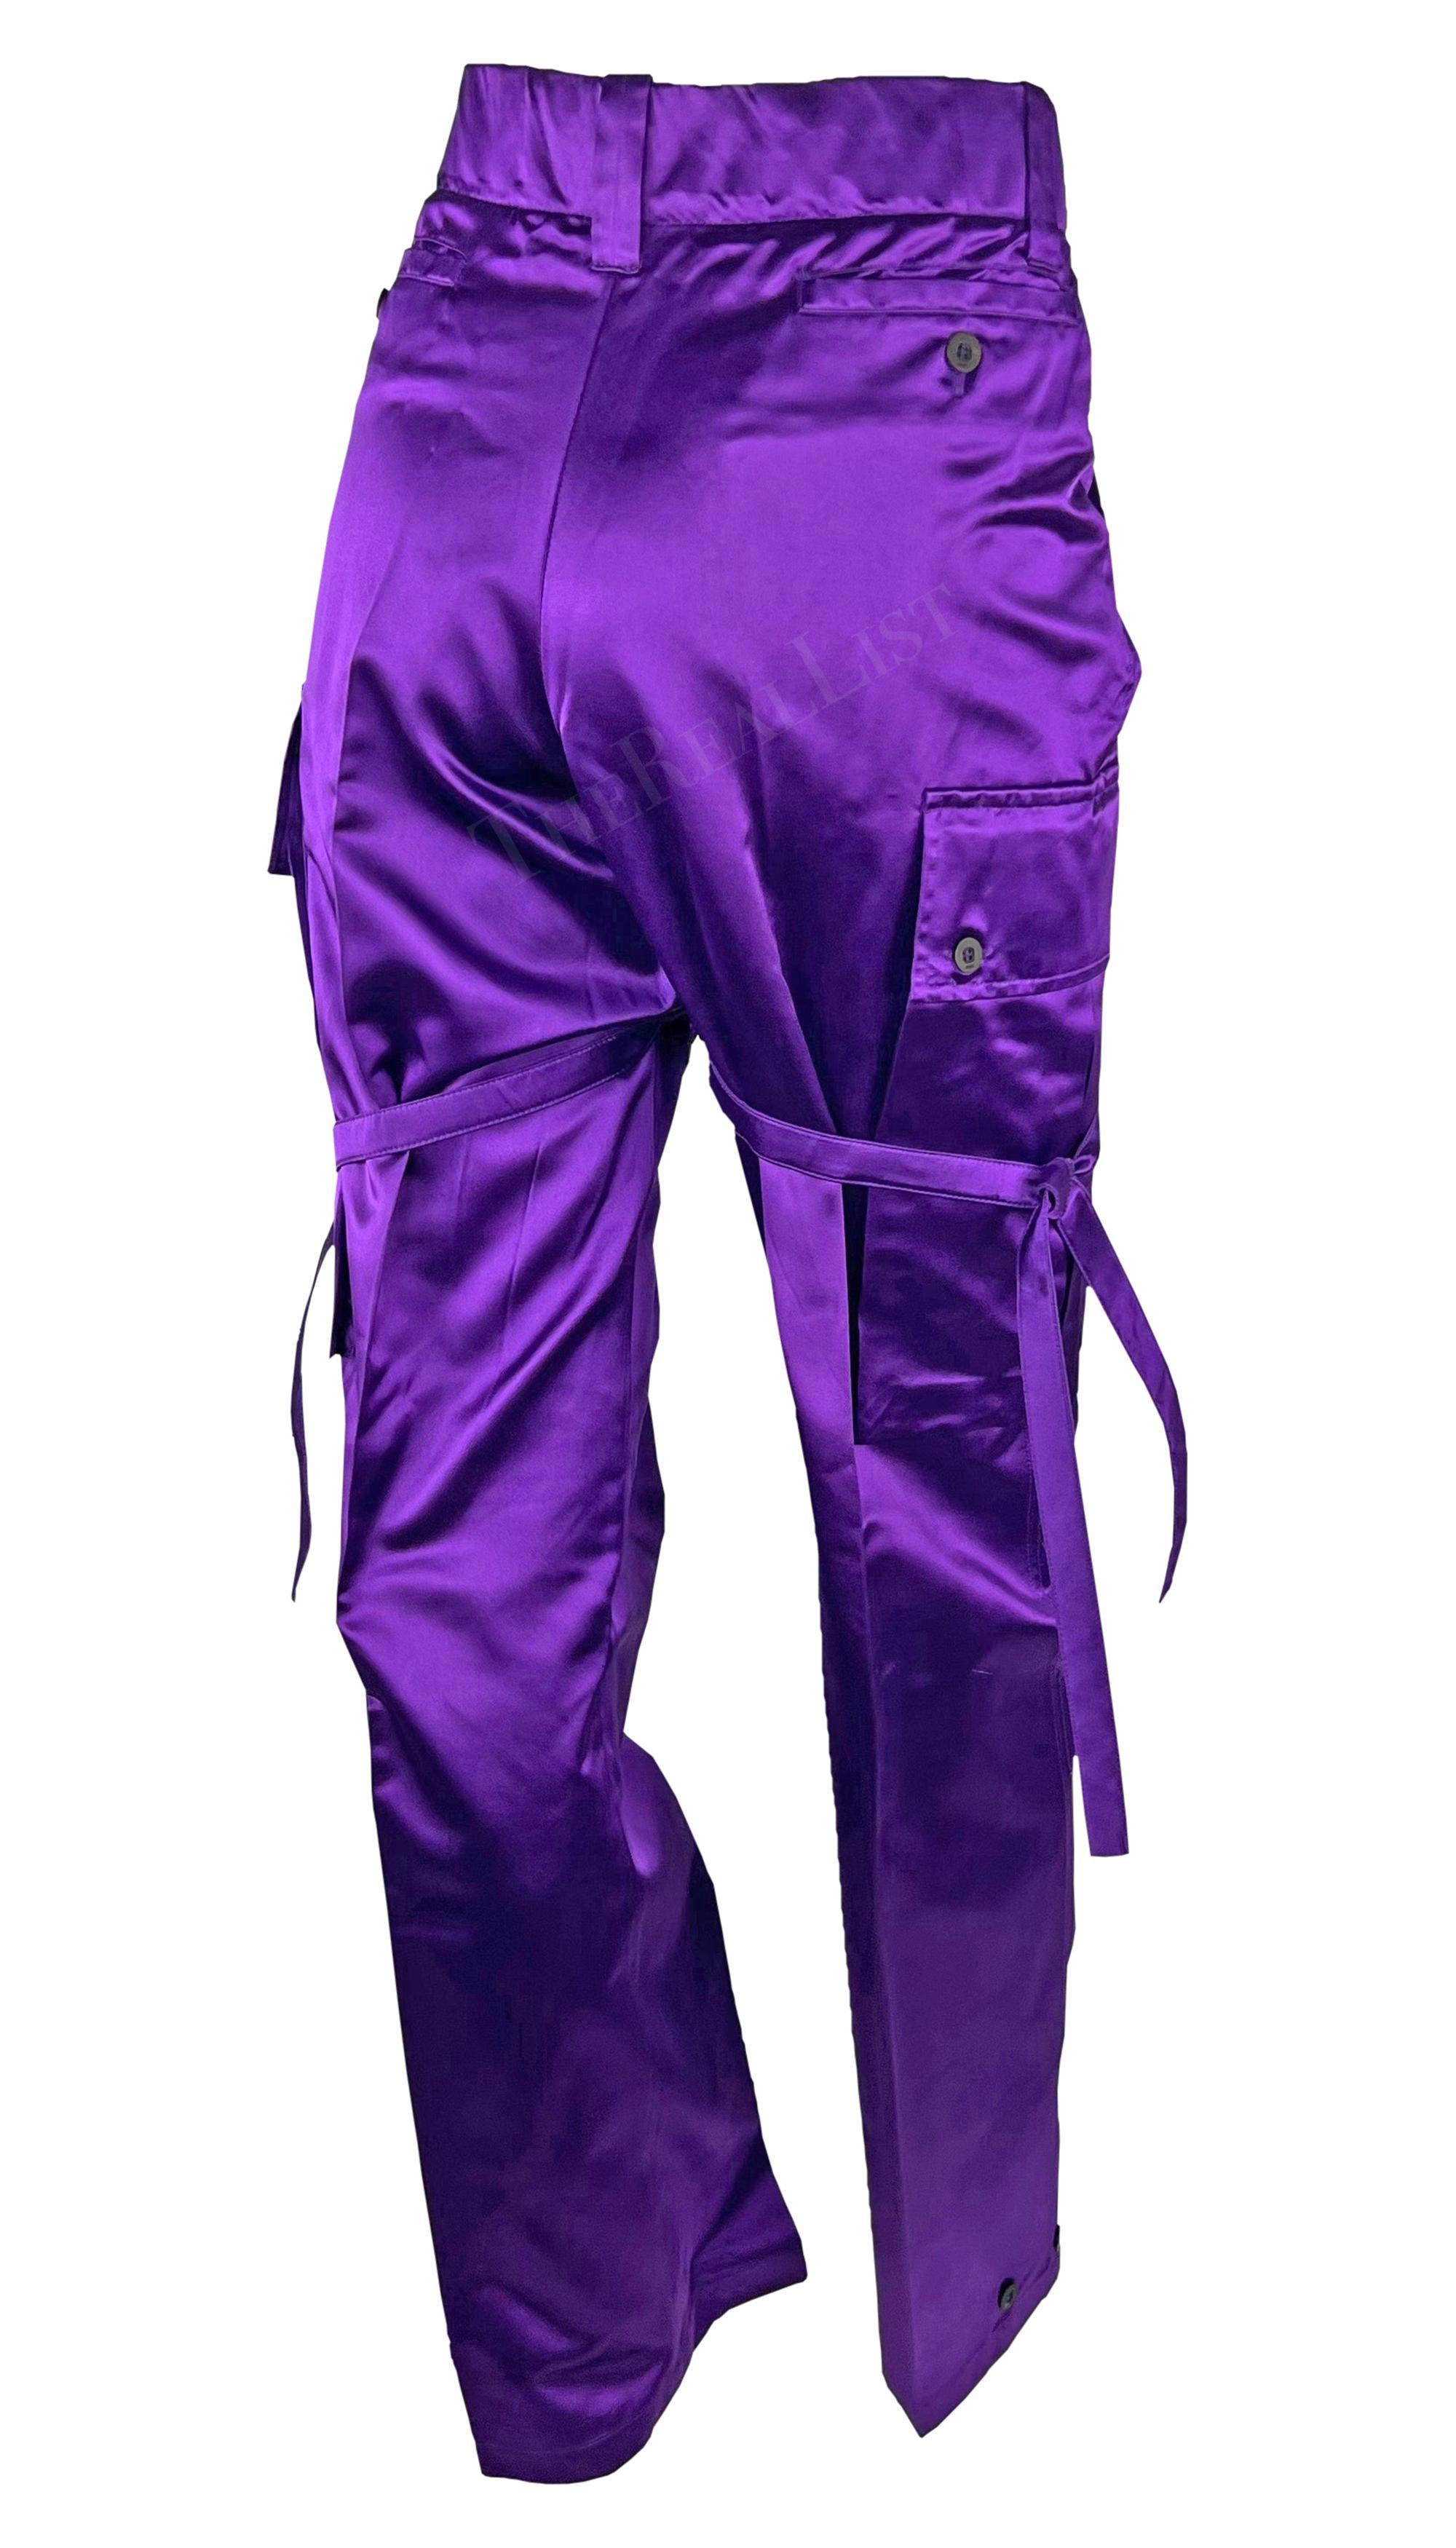 NWT S/S 2001 Gucci by Tom Ford Runway Purple Satin Tie Wide Leg Cargo Pants  For Sale 3